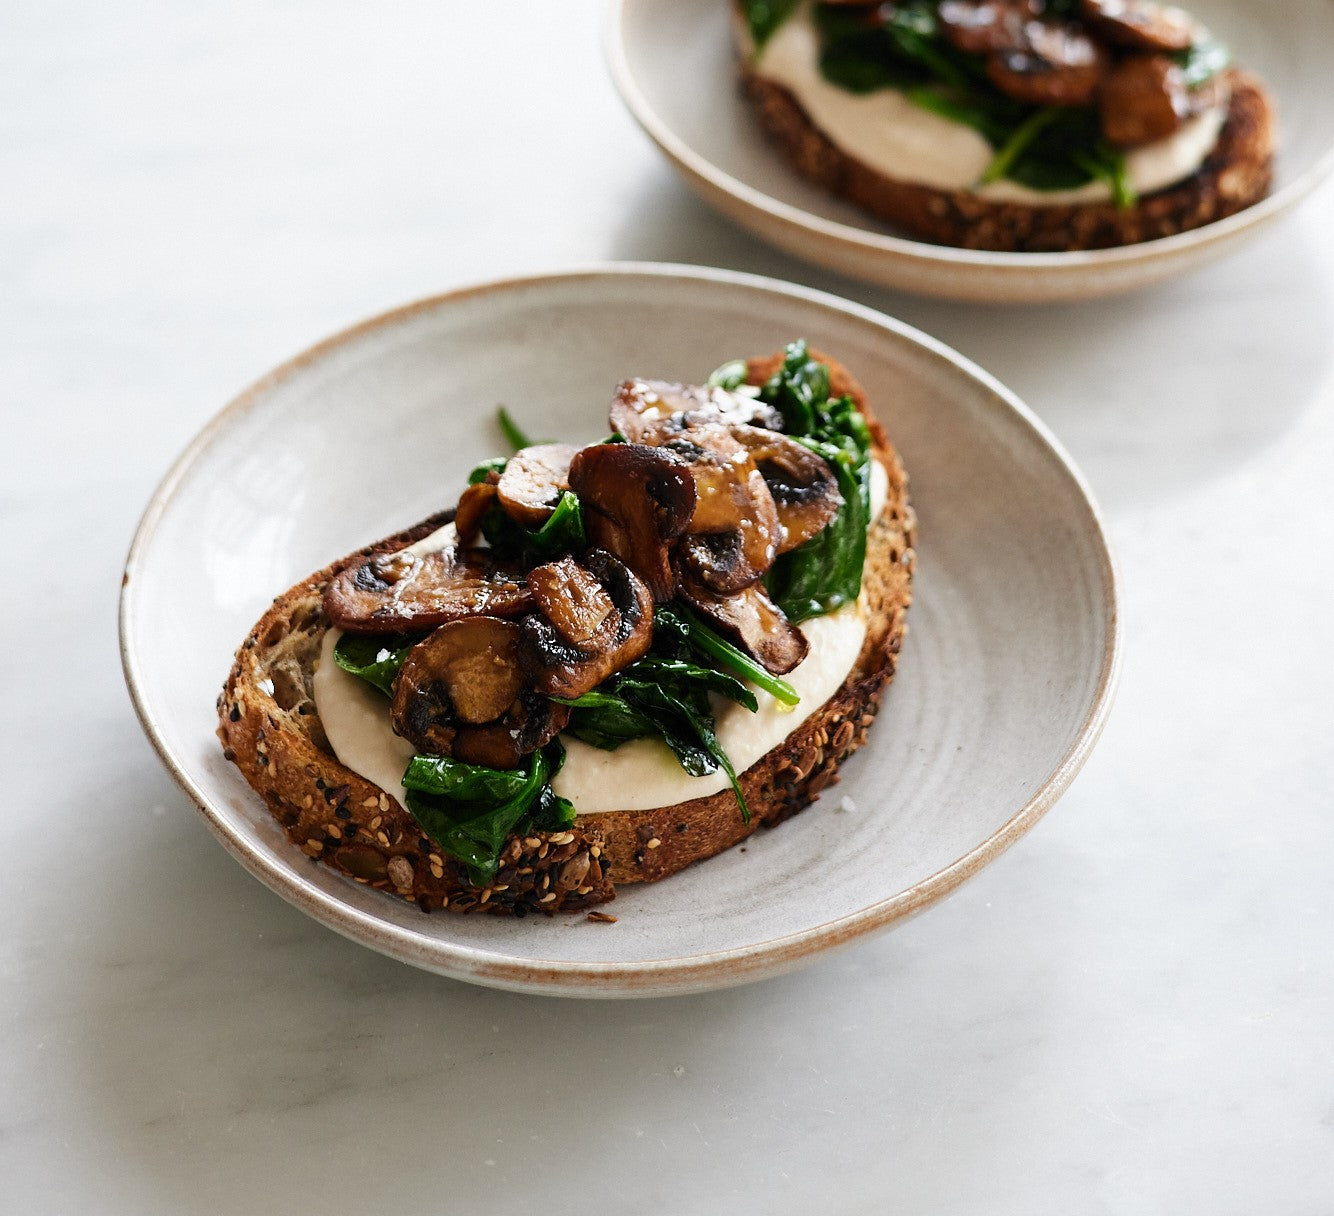 Miso Mushrooms, White Bean Hummus and Spinach on Toast - Deliciously Ella